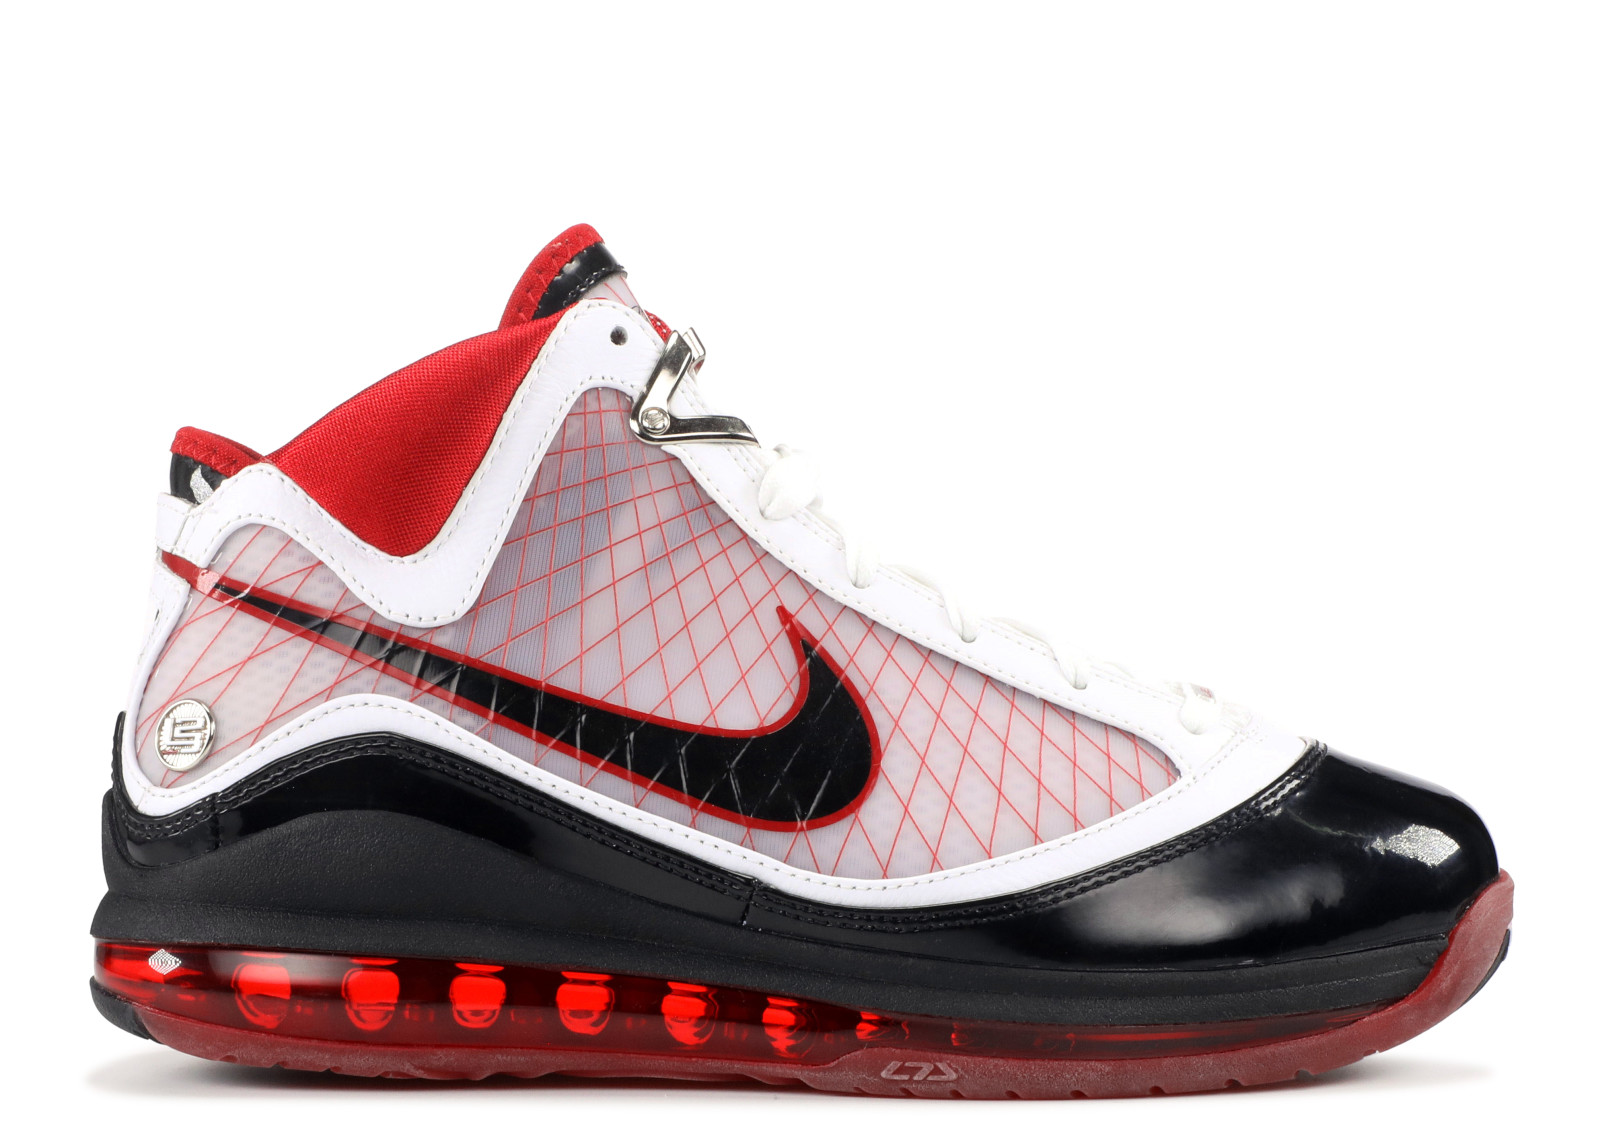 the best lebron shoes